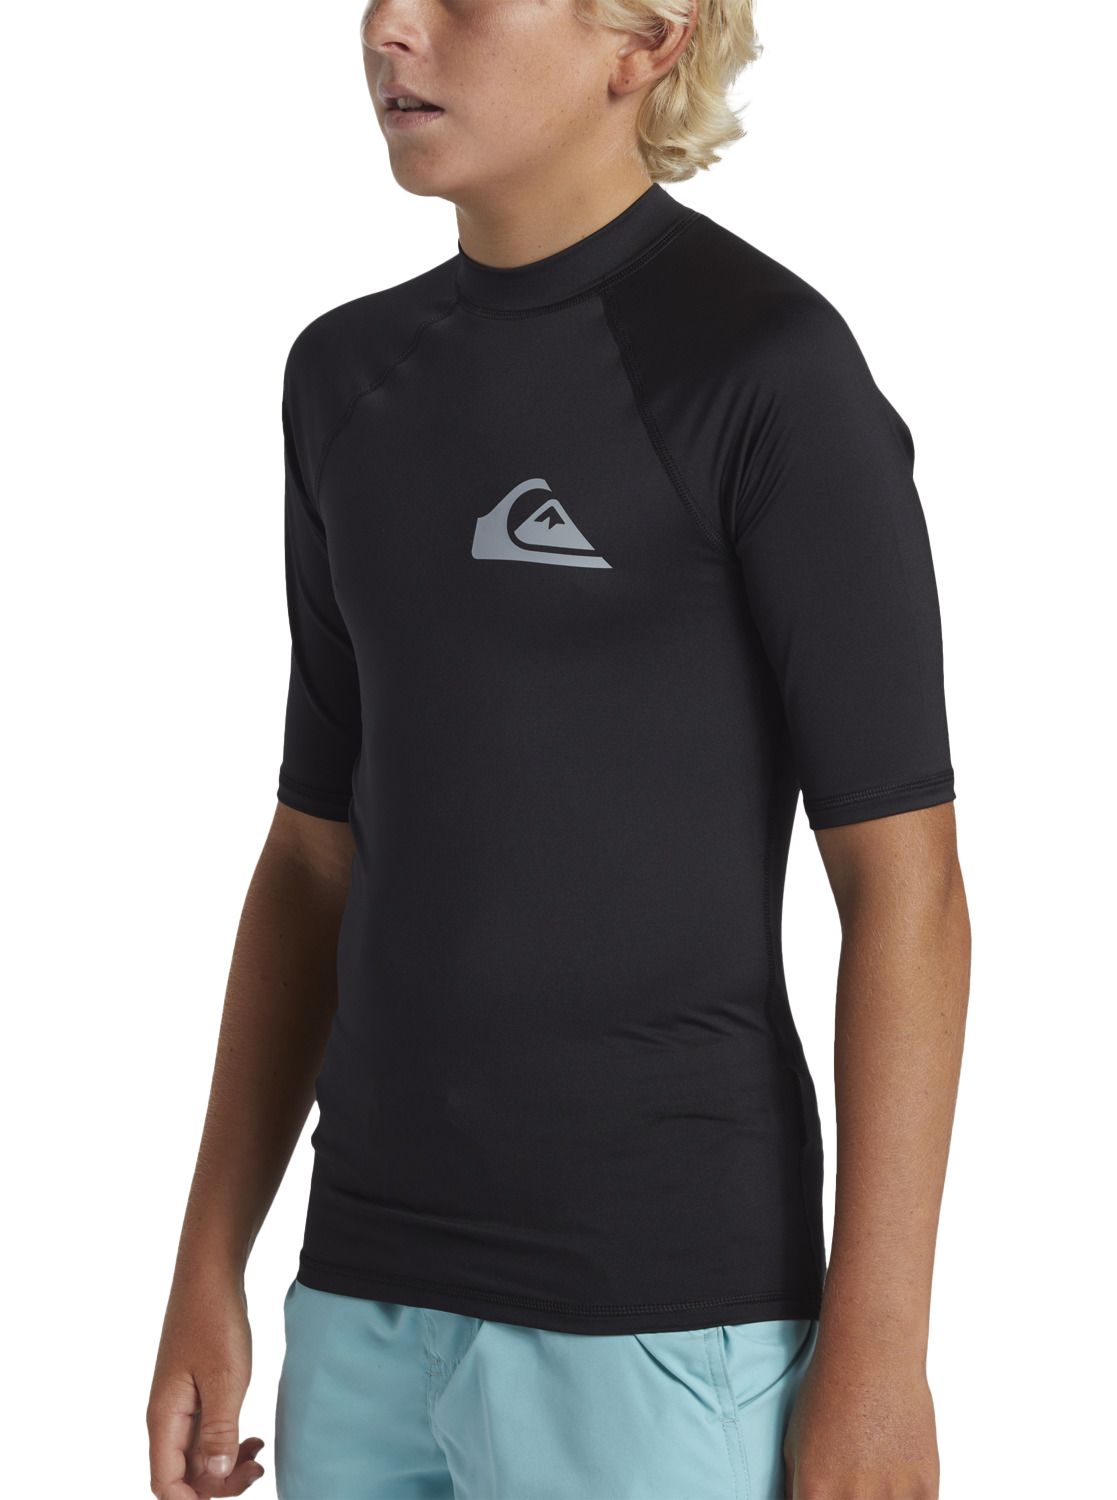 QUIKSILVER, J EVERYDAY UPF50 SS YOUTH